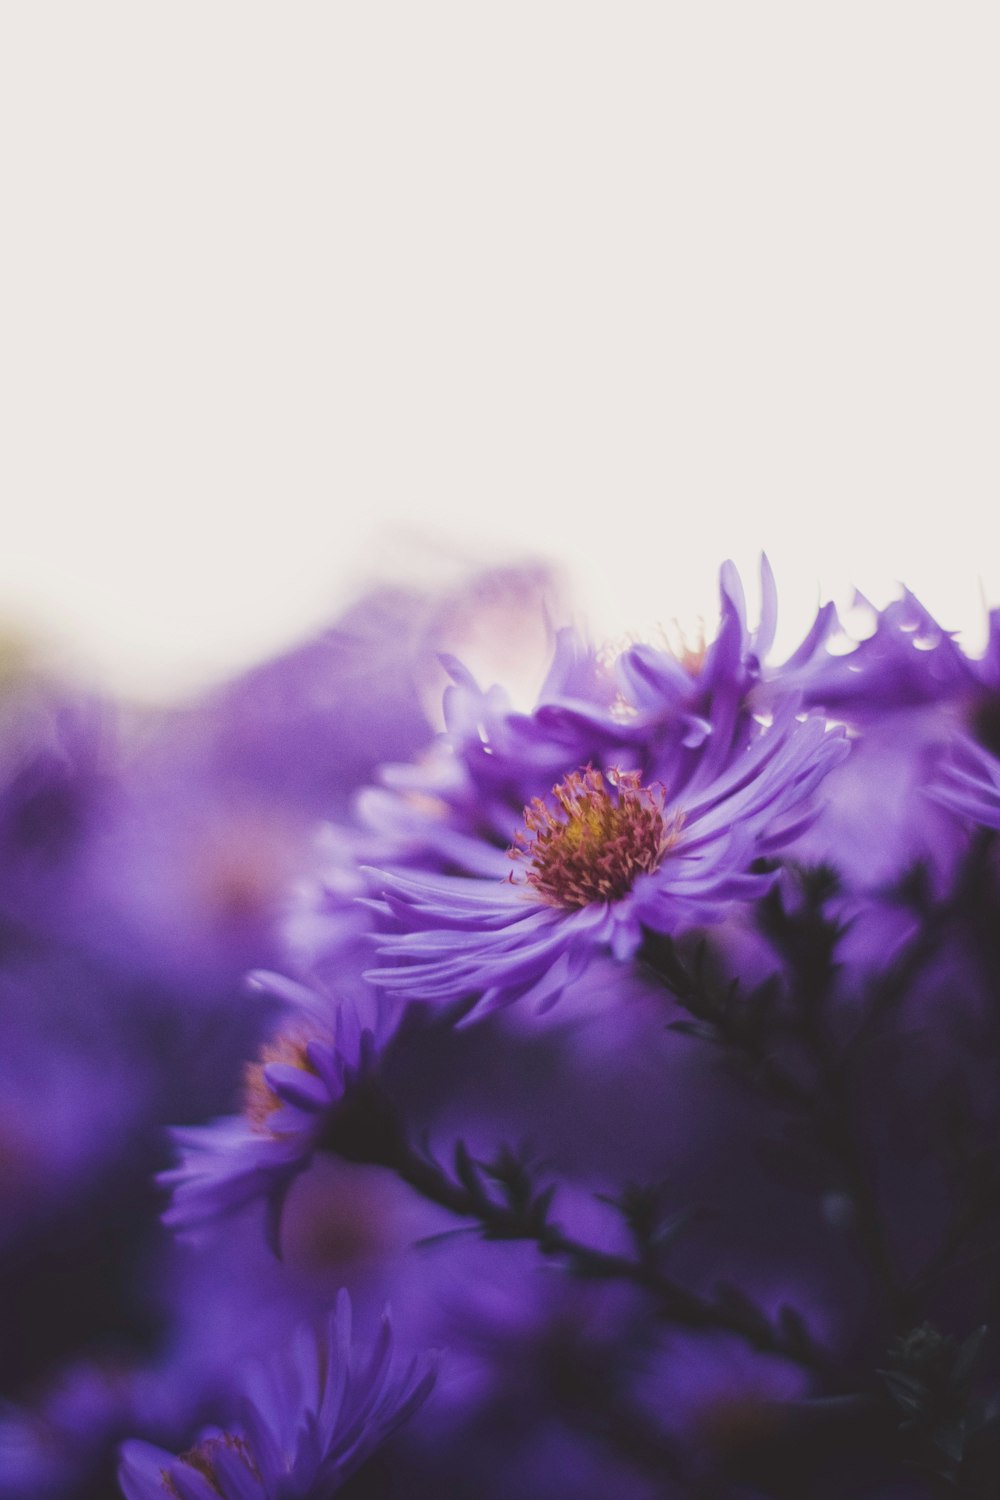 750+ Purple Aesthetic Pictures  Download Free Images on Unsplash